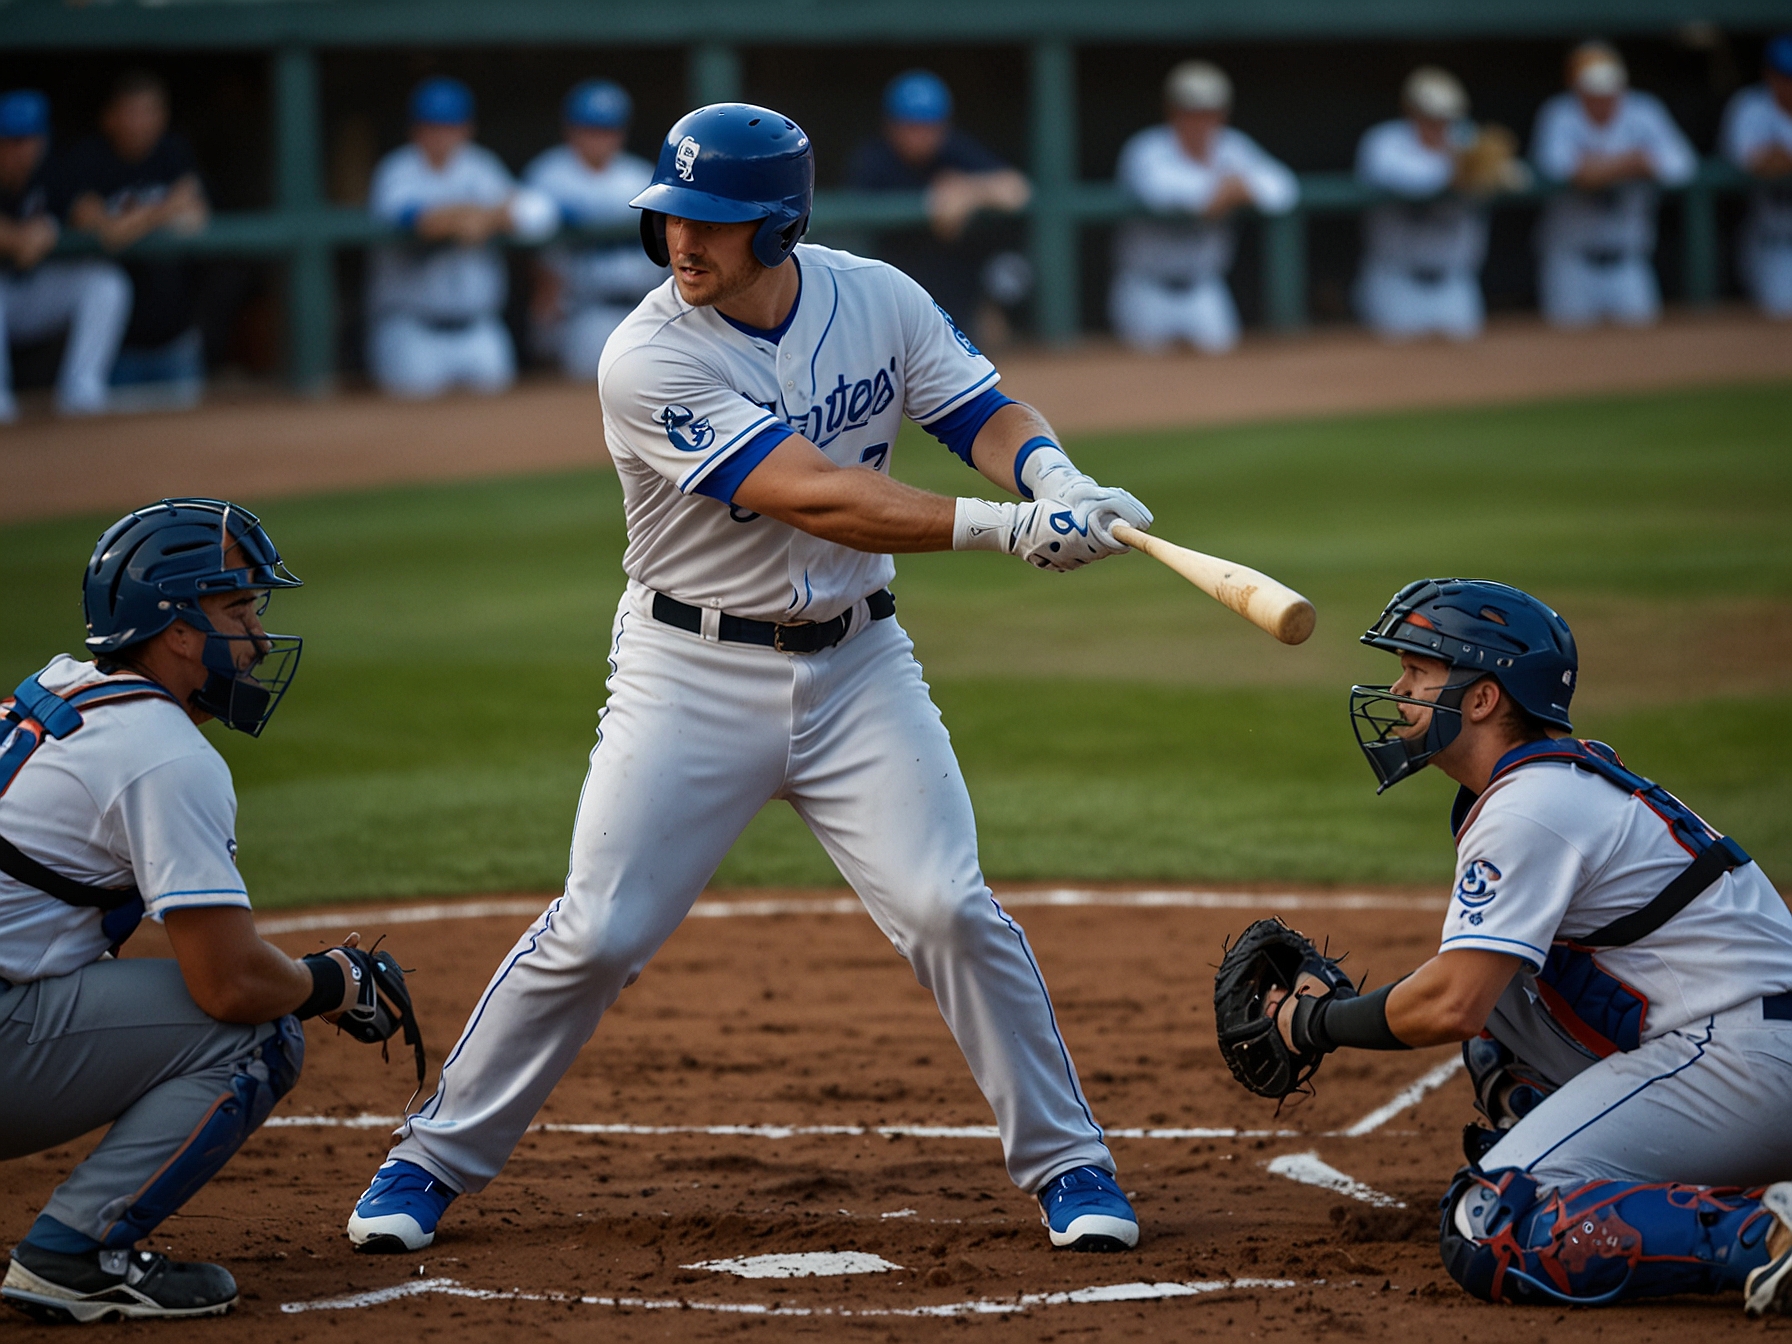 Matt Wallner, mid-swing at the plate, showcasing improved mechanics that have led to his resurgence with the St. Paul Saints. The background includes supportive teammates and coaching staff.